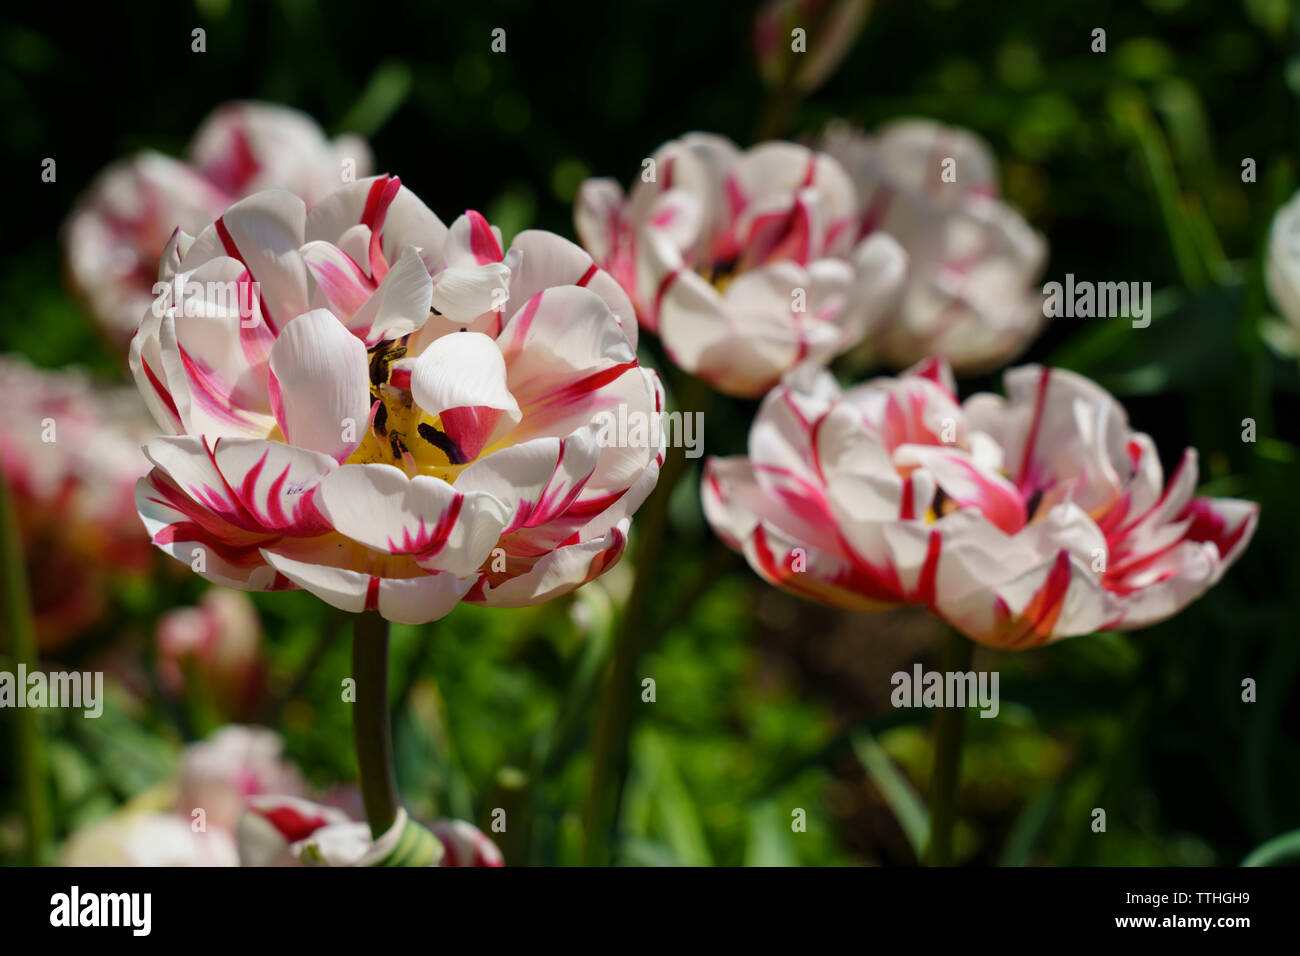 Sunlit pink and white Tulips with curly petals. Stock Photo